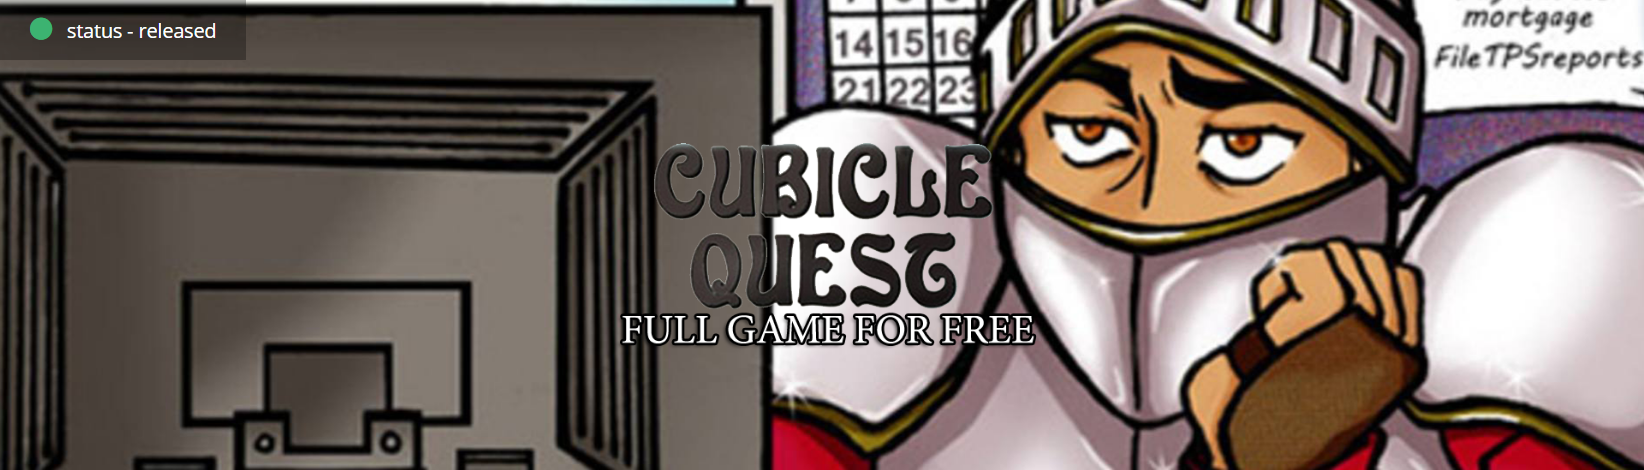 Screenshot_2019-08-16 Cubicle Quest Indiegala Developers.png